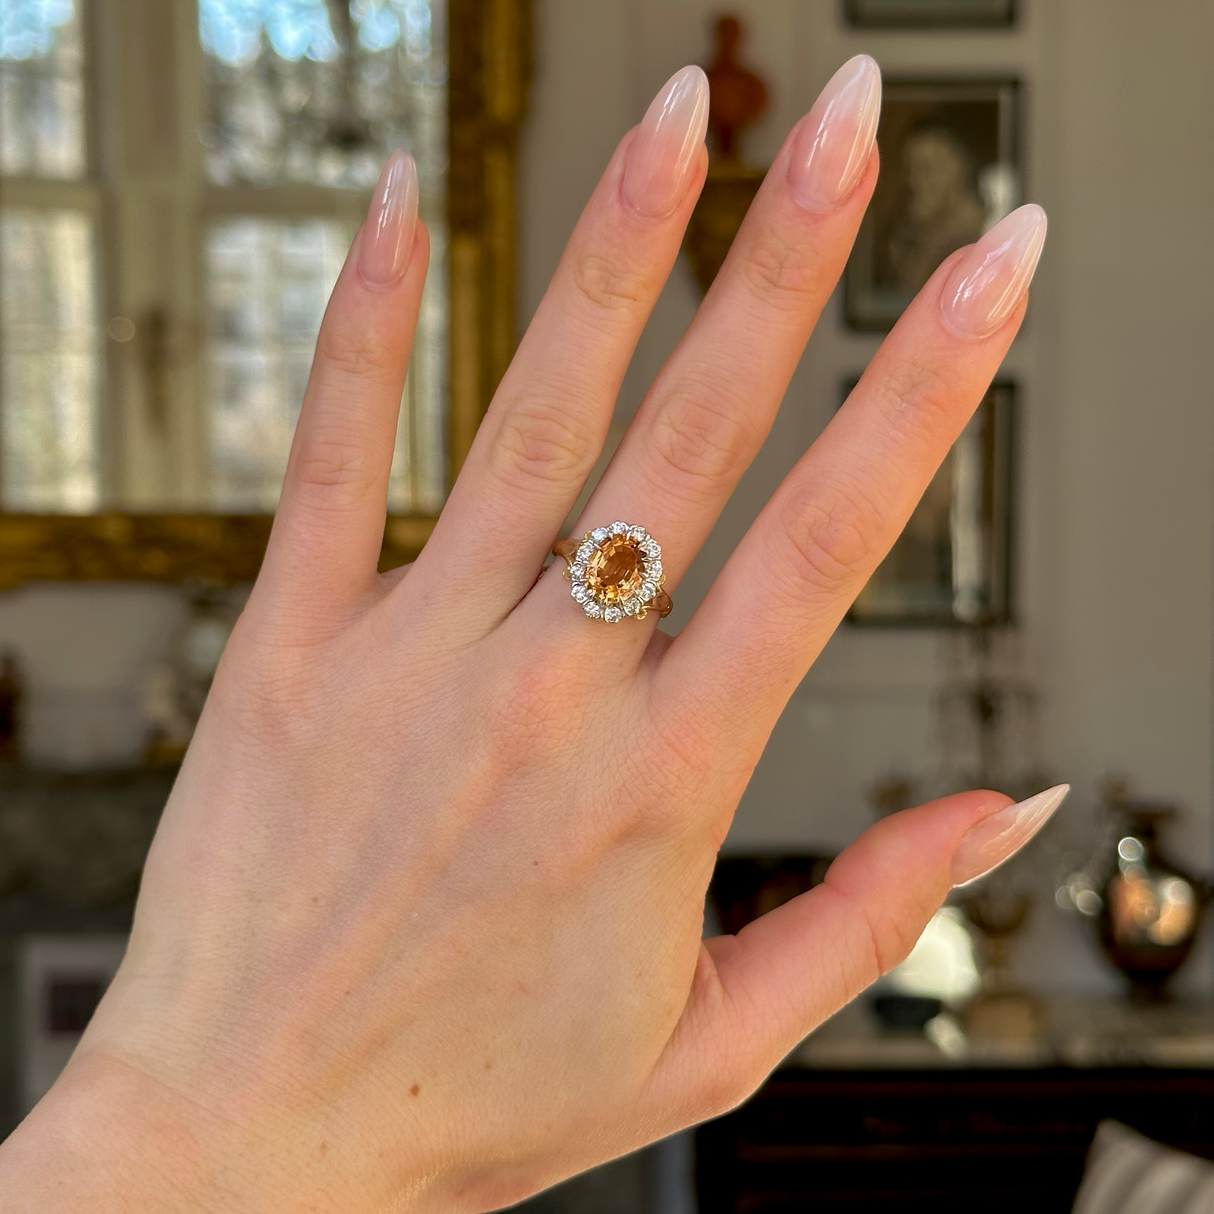 Antique, Victorian Topaz and Diamond Cluster Ring, 18ct Yellow Gold worn on hand.